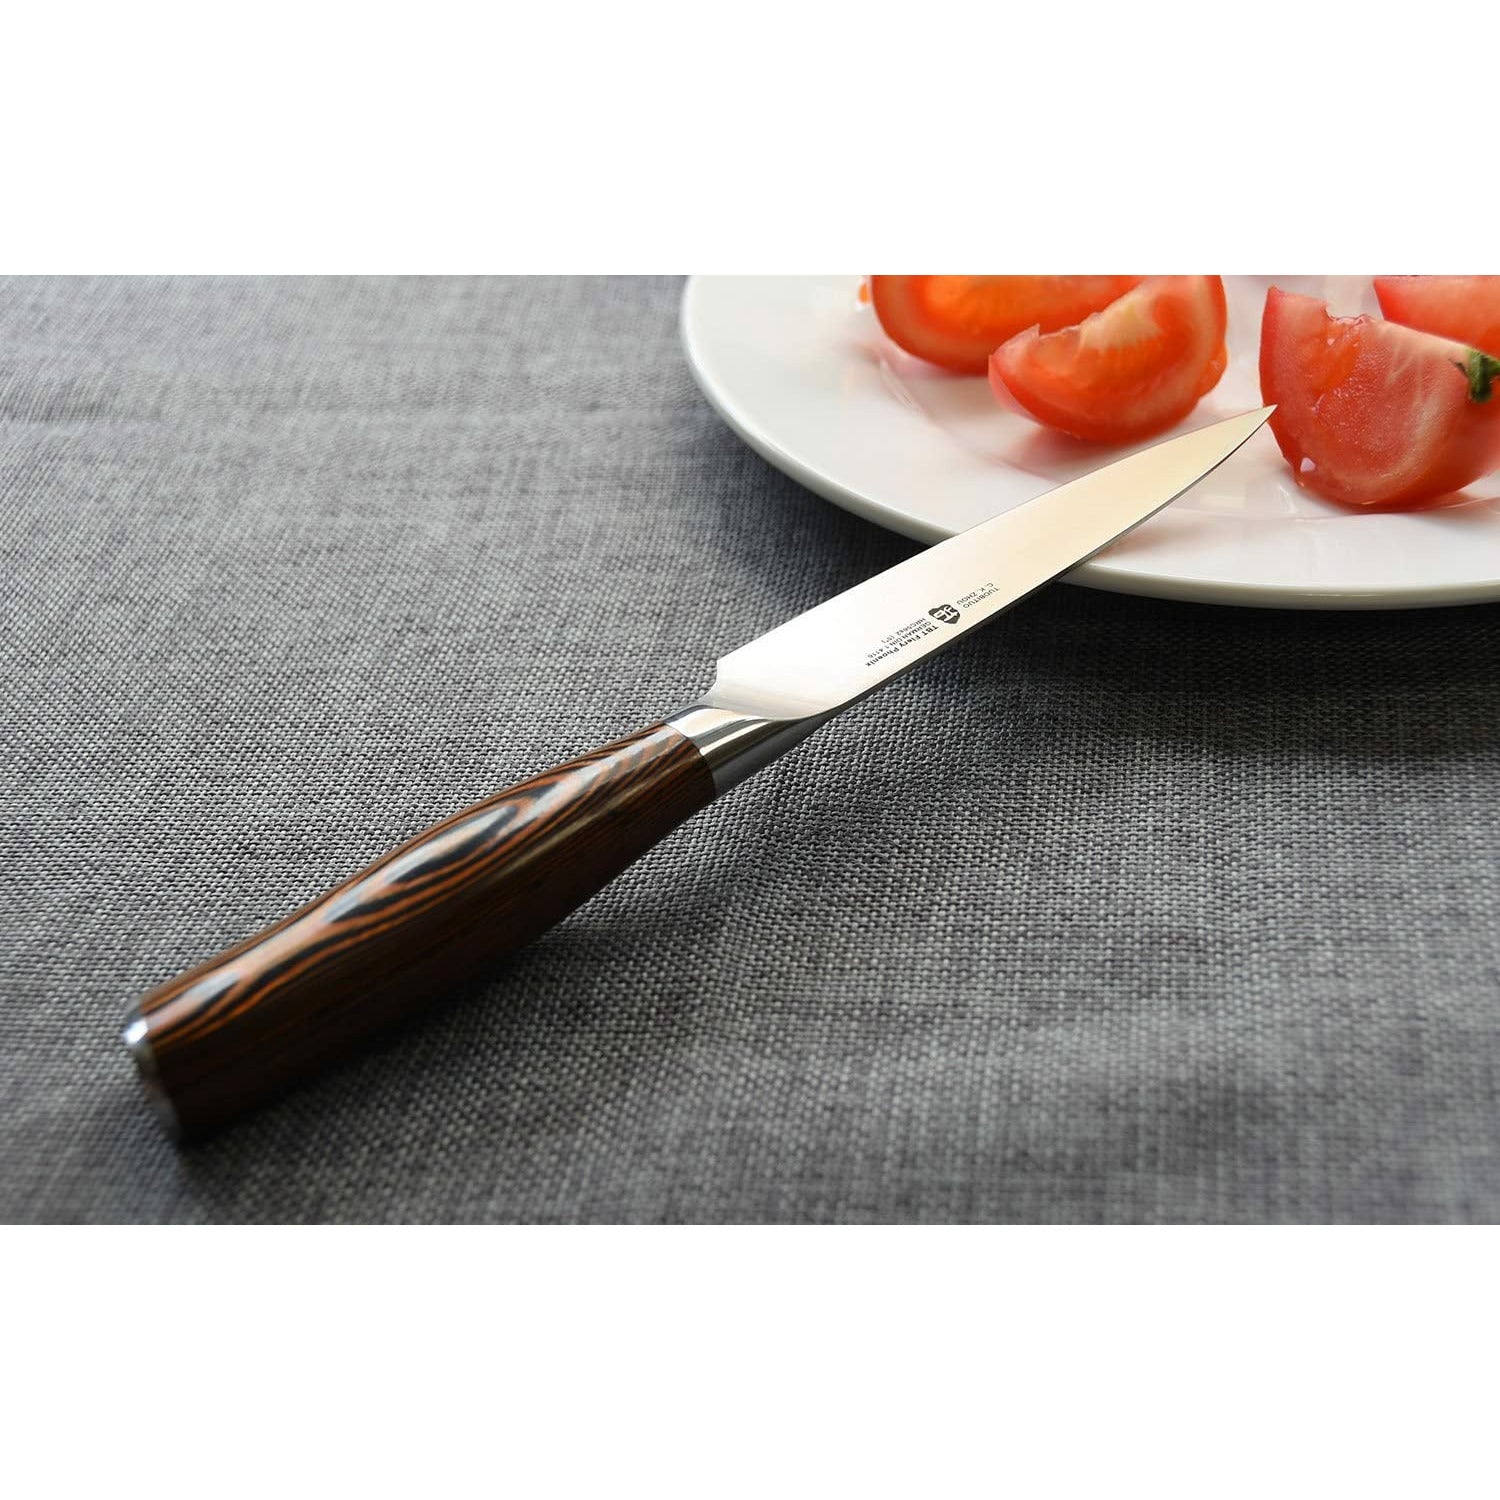 TUO Cutlery  Kissimmee FL